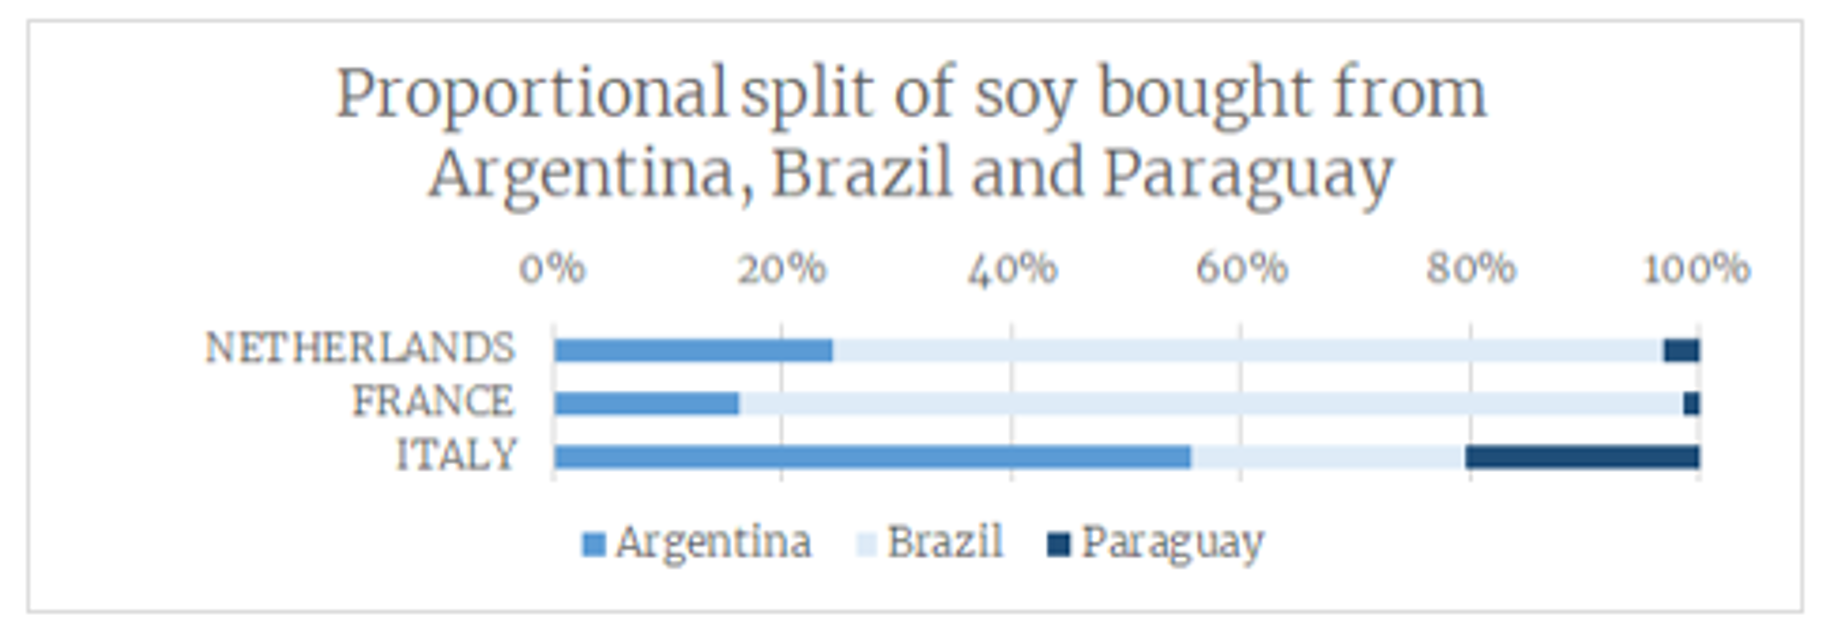 Proportional split of soy bought from Argentina, Brazil, and Paraguay